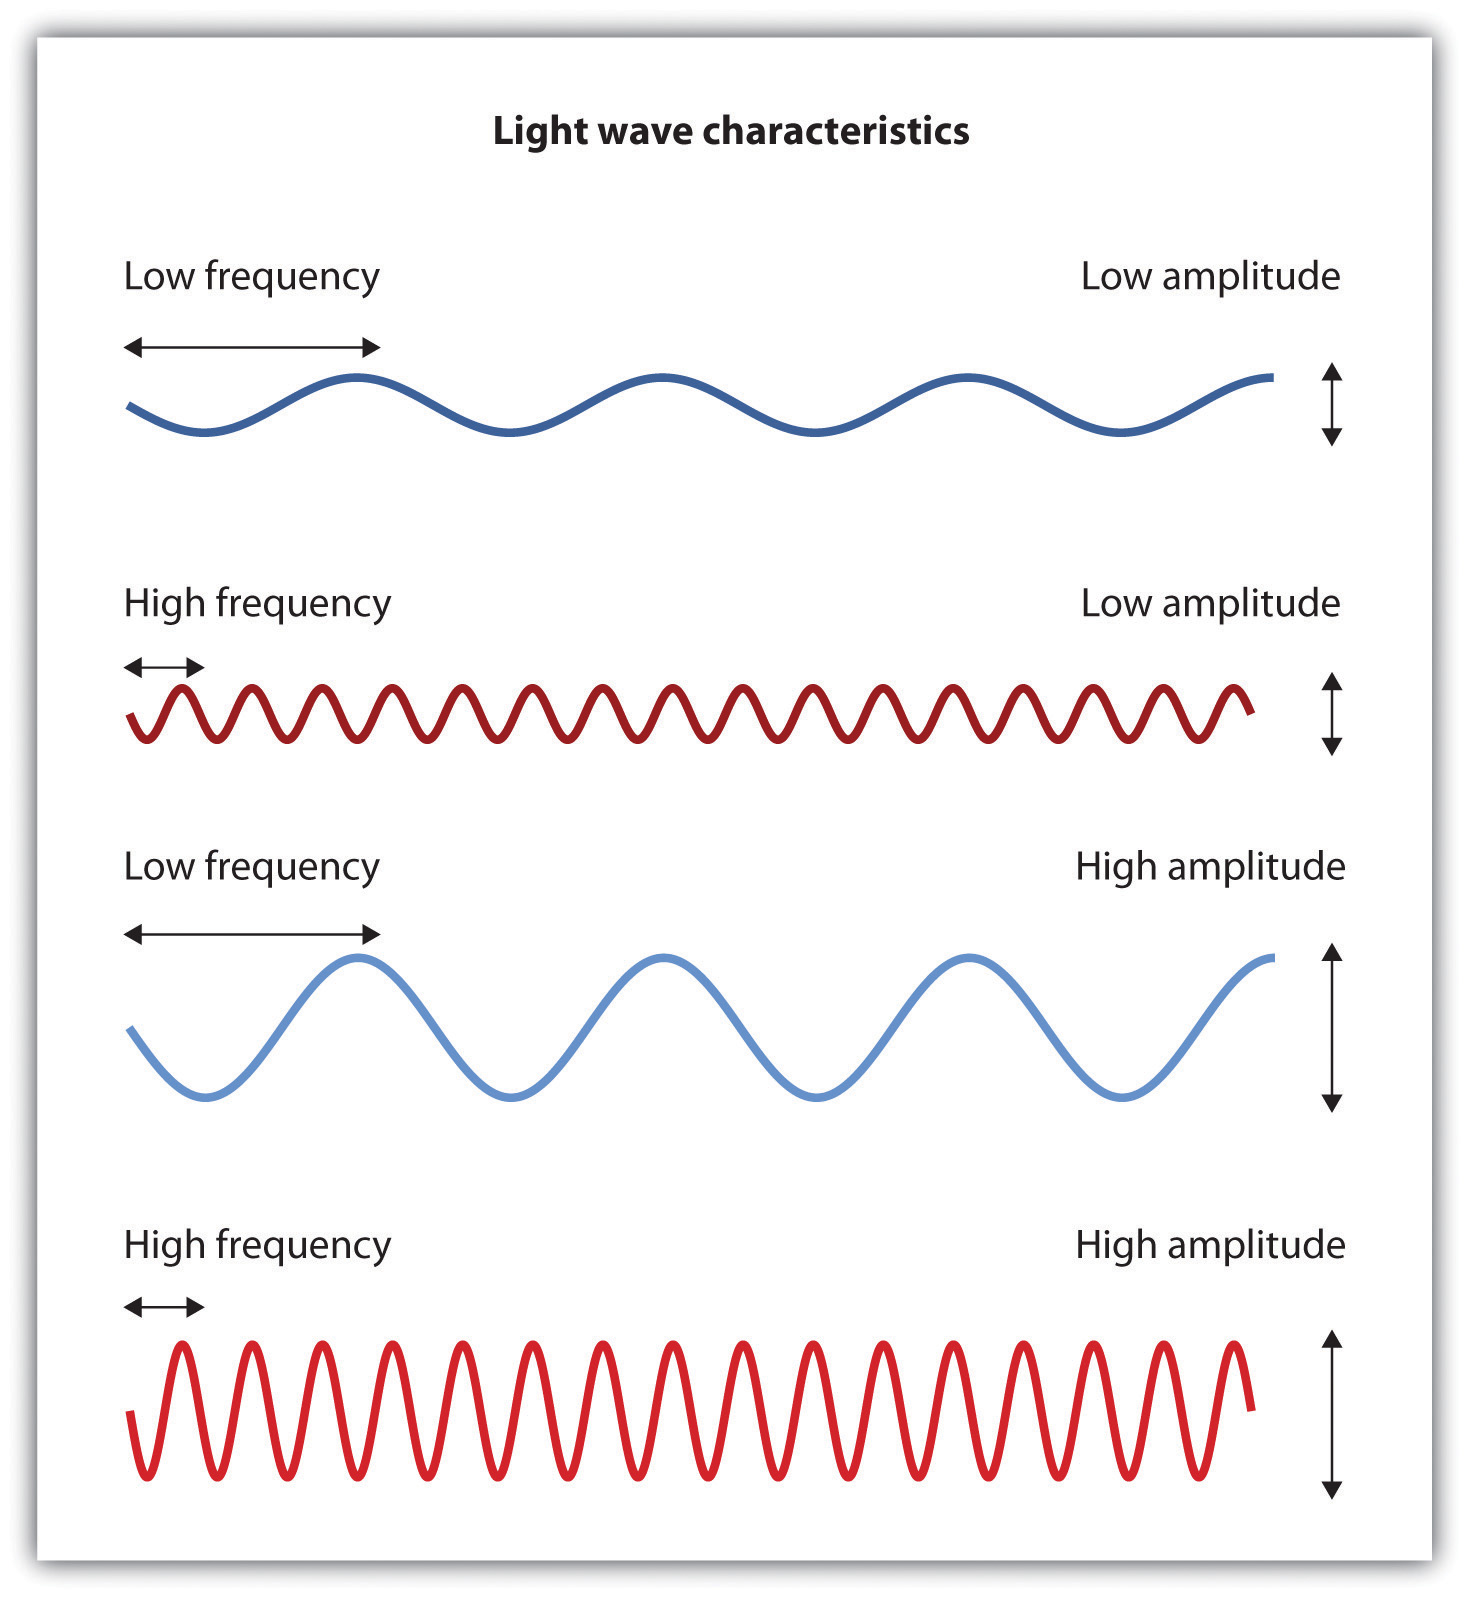 Low- and High-Frequency Sine Waves and Low- and High-Intensity Sine Waves and Their Corresponding Colors